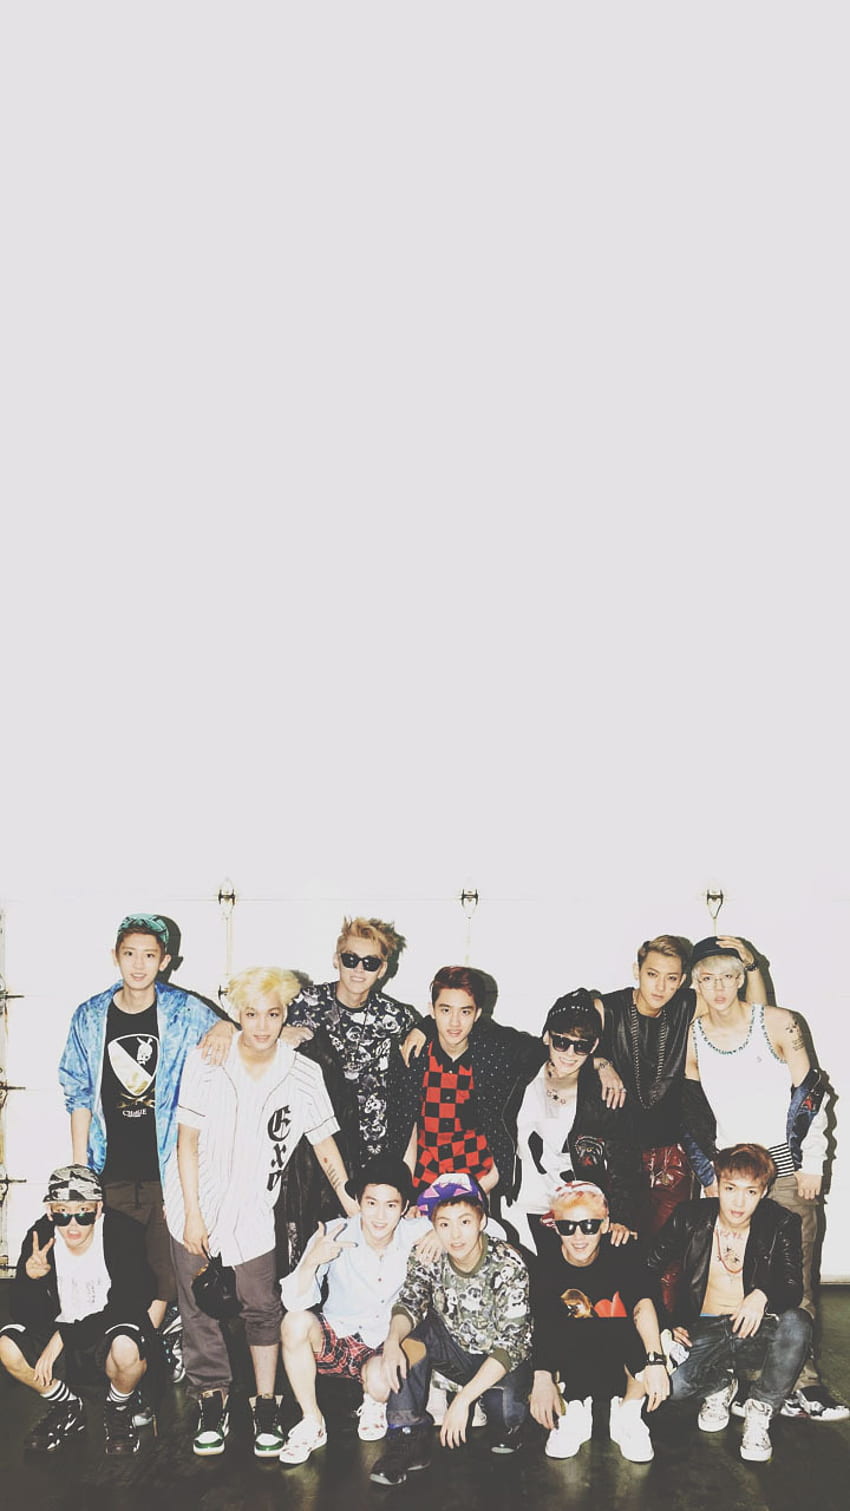 EXO wallpaper by Amalia_vol - Download on ZEDGE™ | 8895